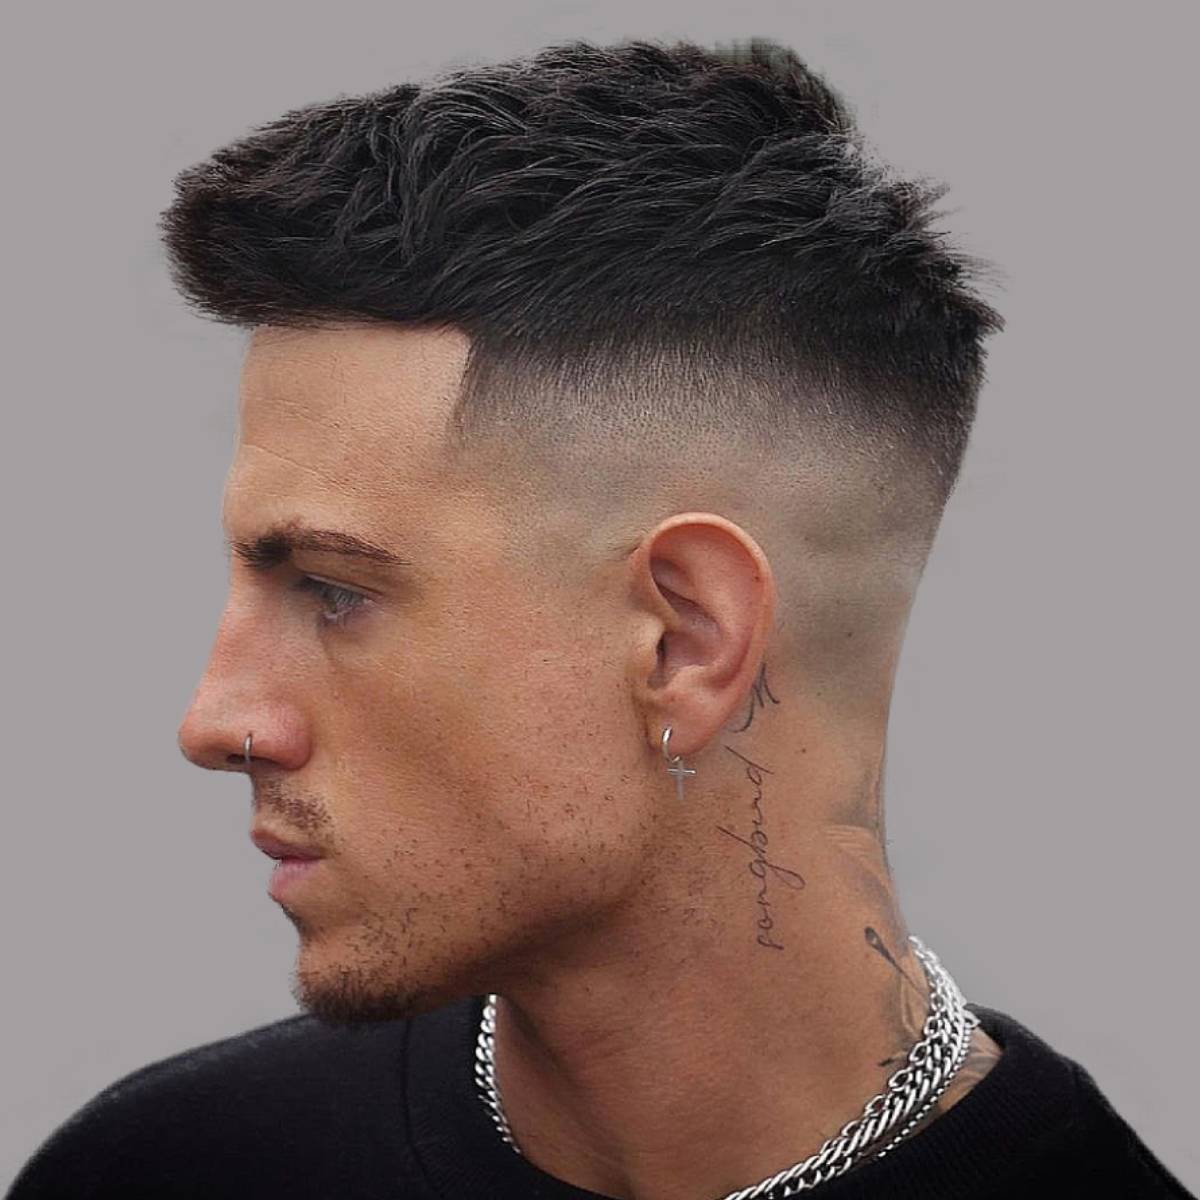 Men's Hairstyles & Haircuts in 2023